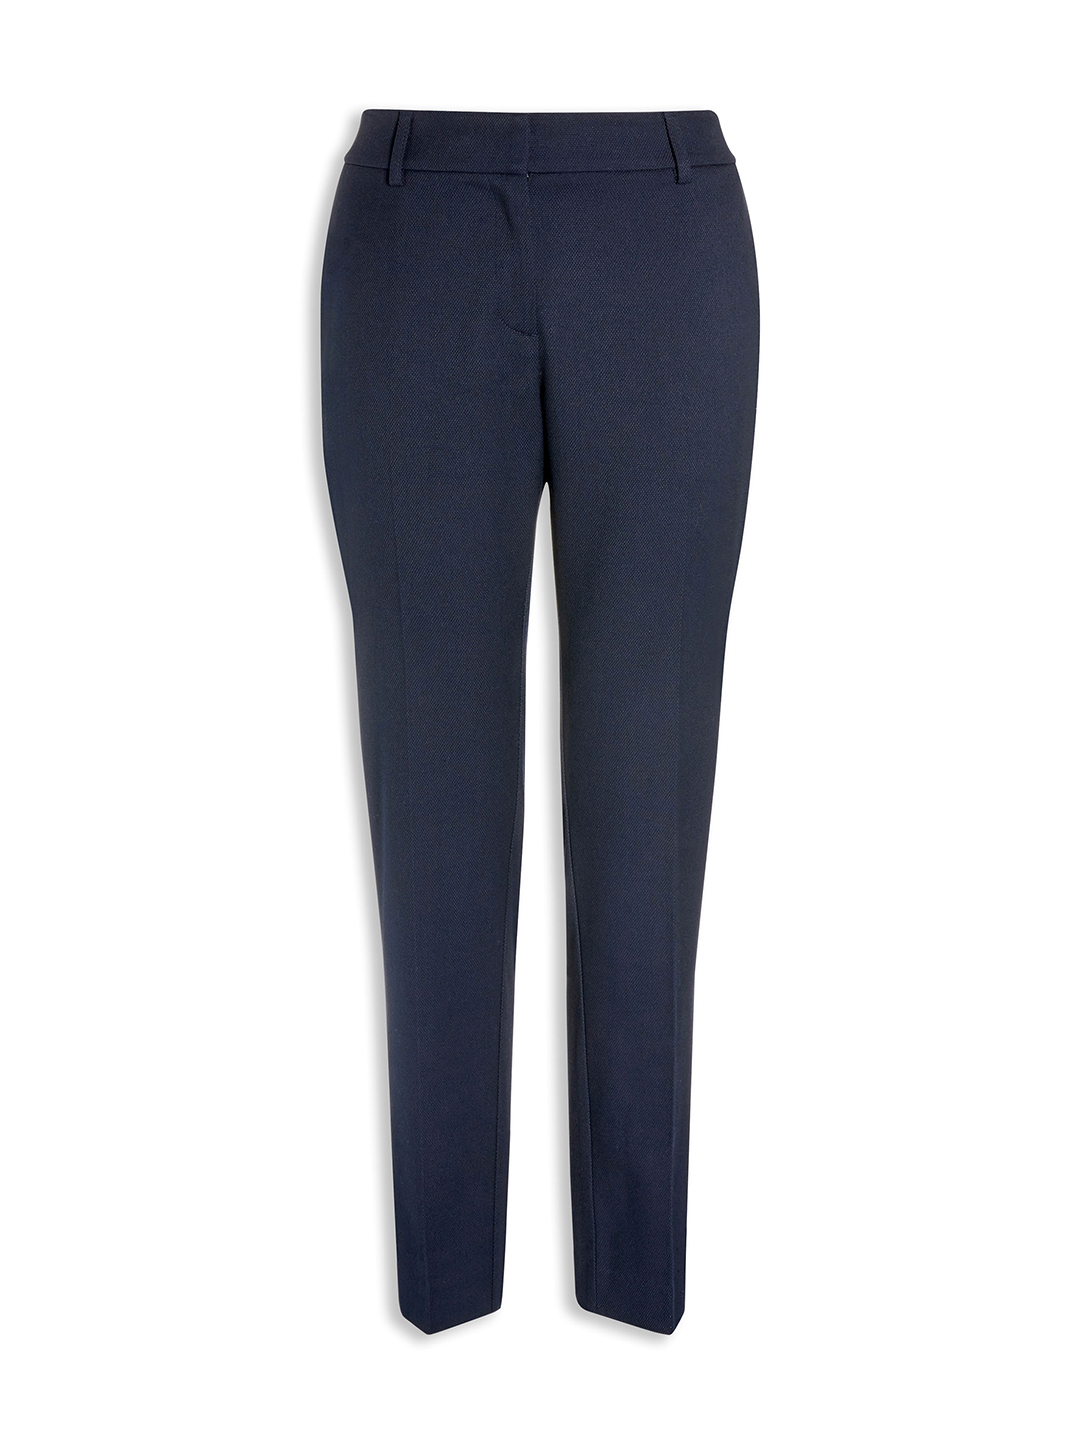 Ladies Jean Trousers and Shirts stock